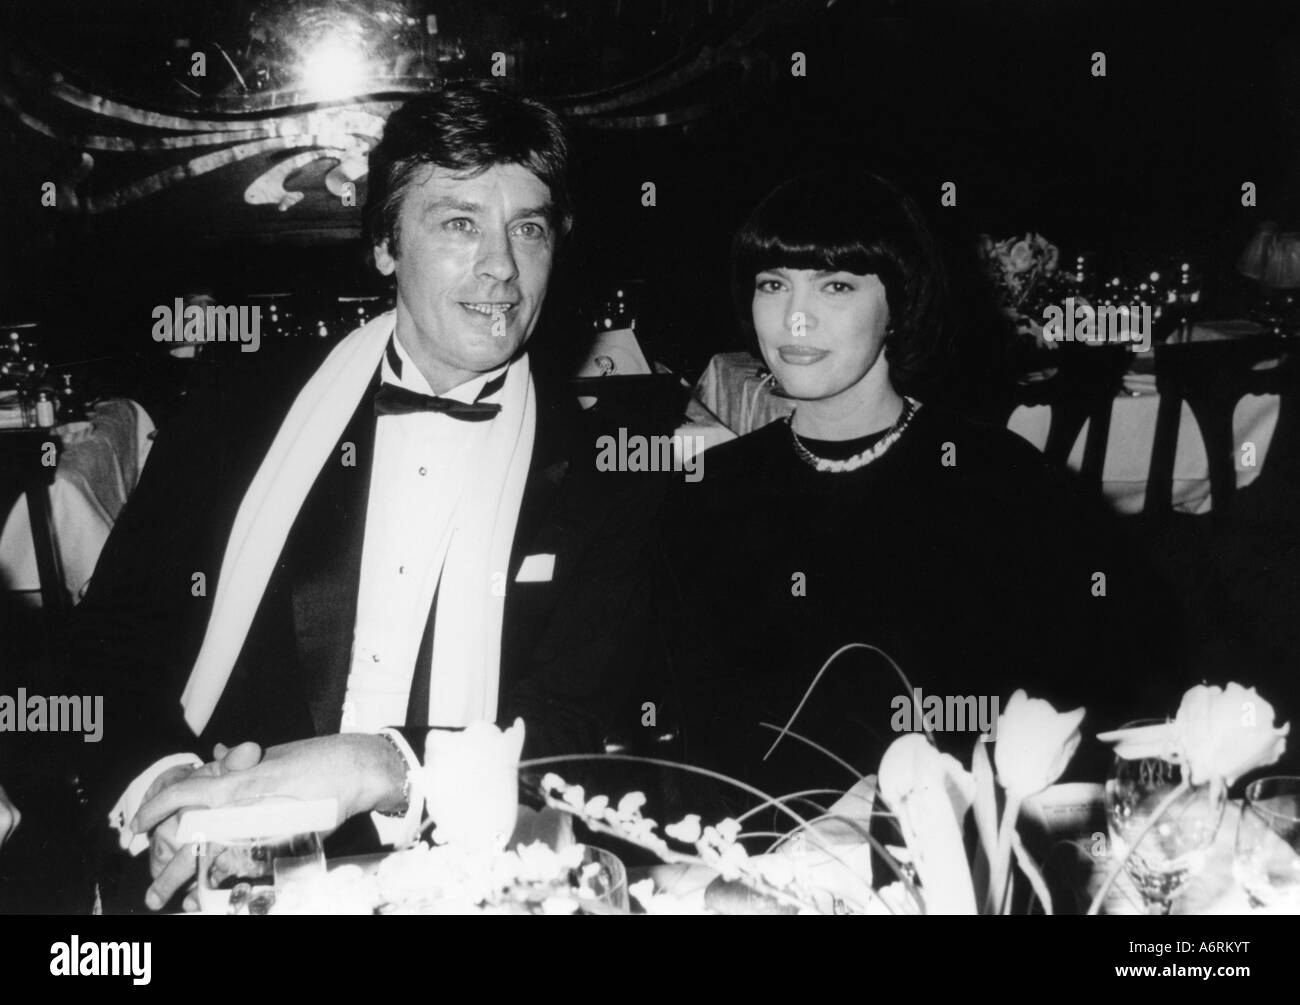 'Mathieu, Mireille, * 22.7.1946, French musician / artist, (singer), half length, with Alain Delon, at first night party, appear Stock Photo